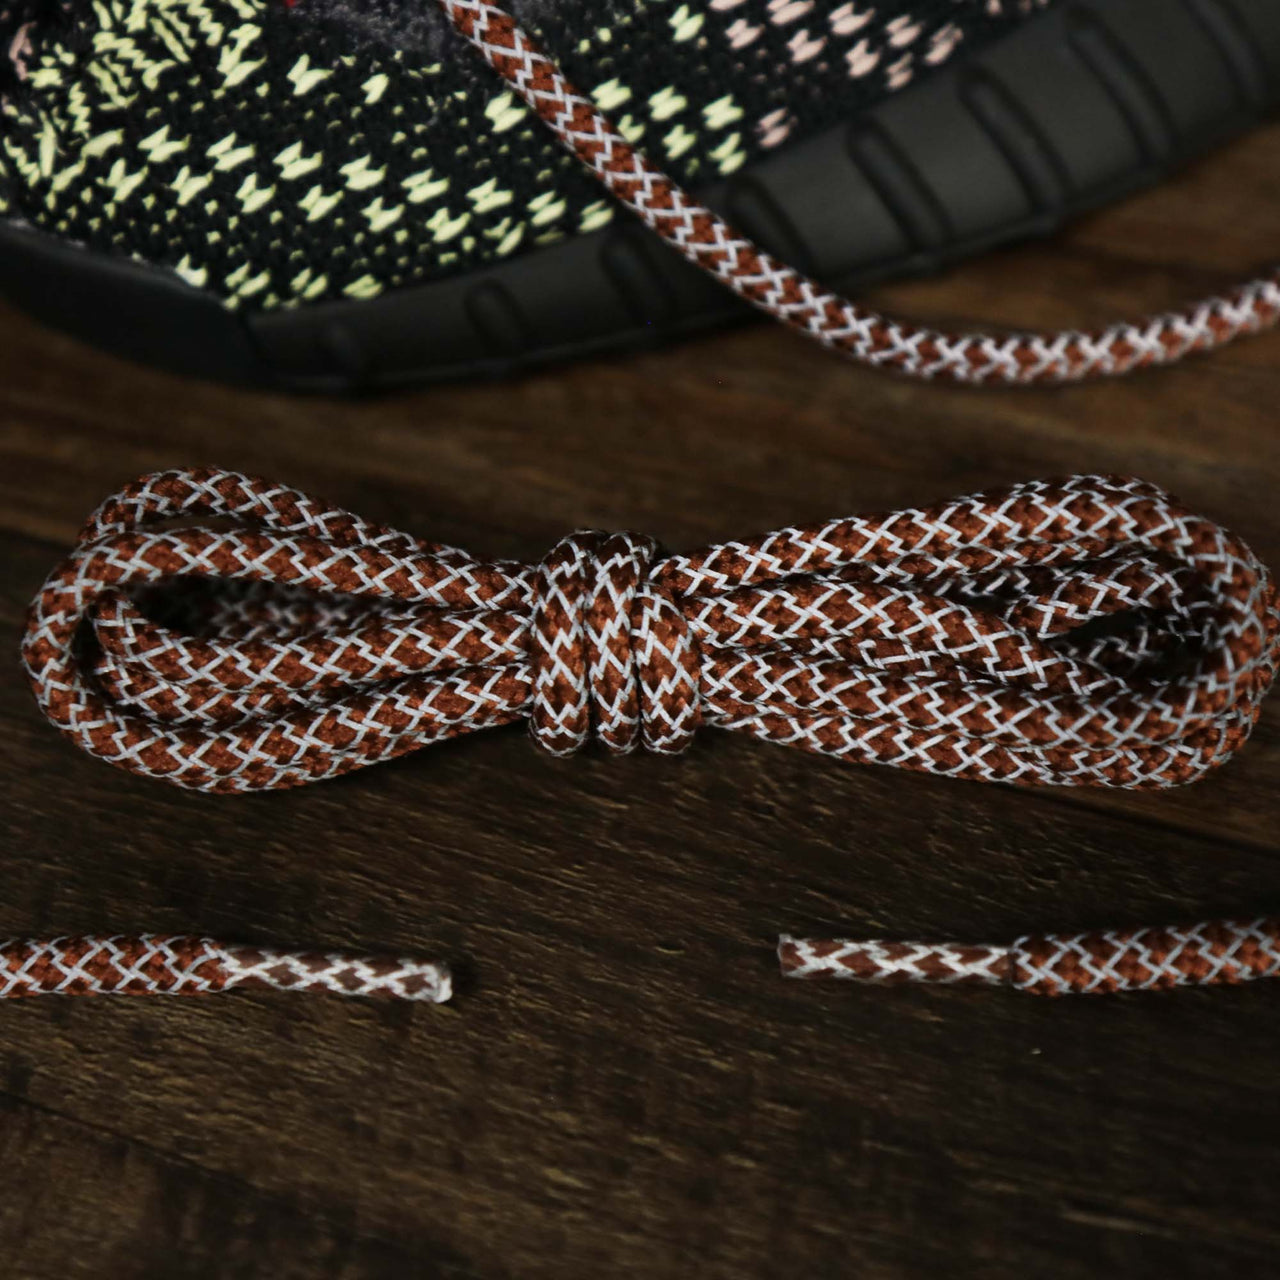 The 3M Reflective Brown Solid Shoelaces with Brown Aglets | 120cm Capswag unfolded and reflective